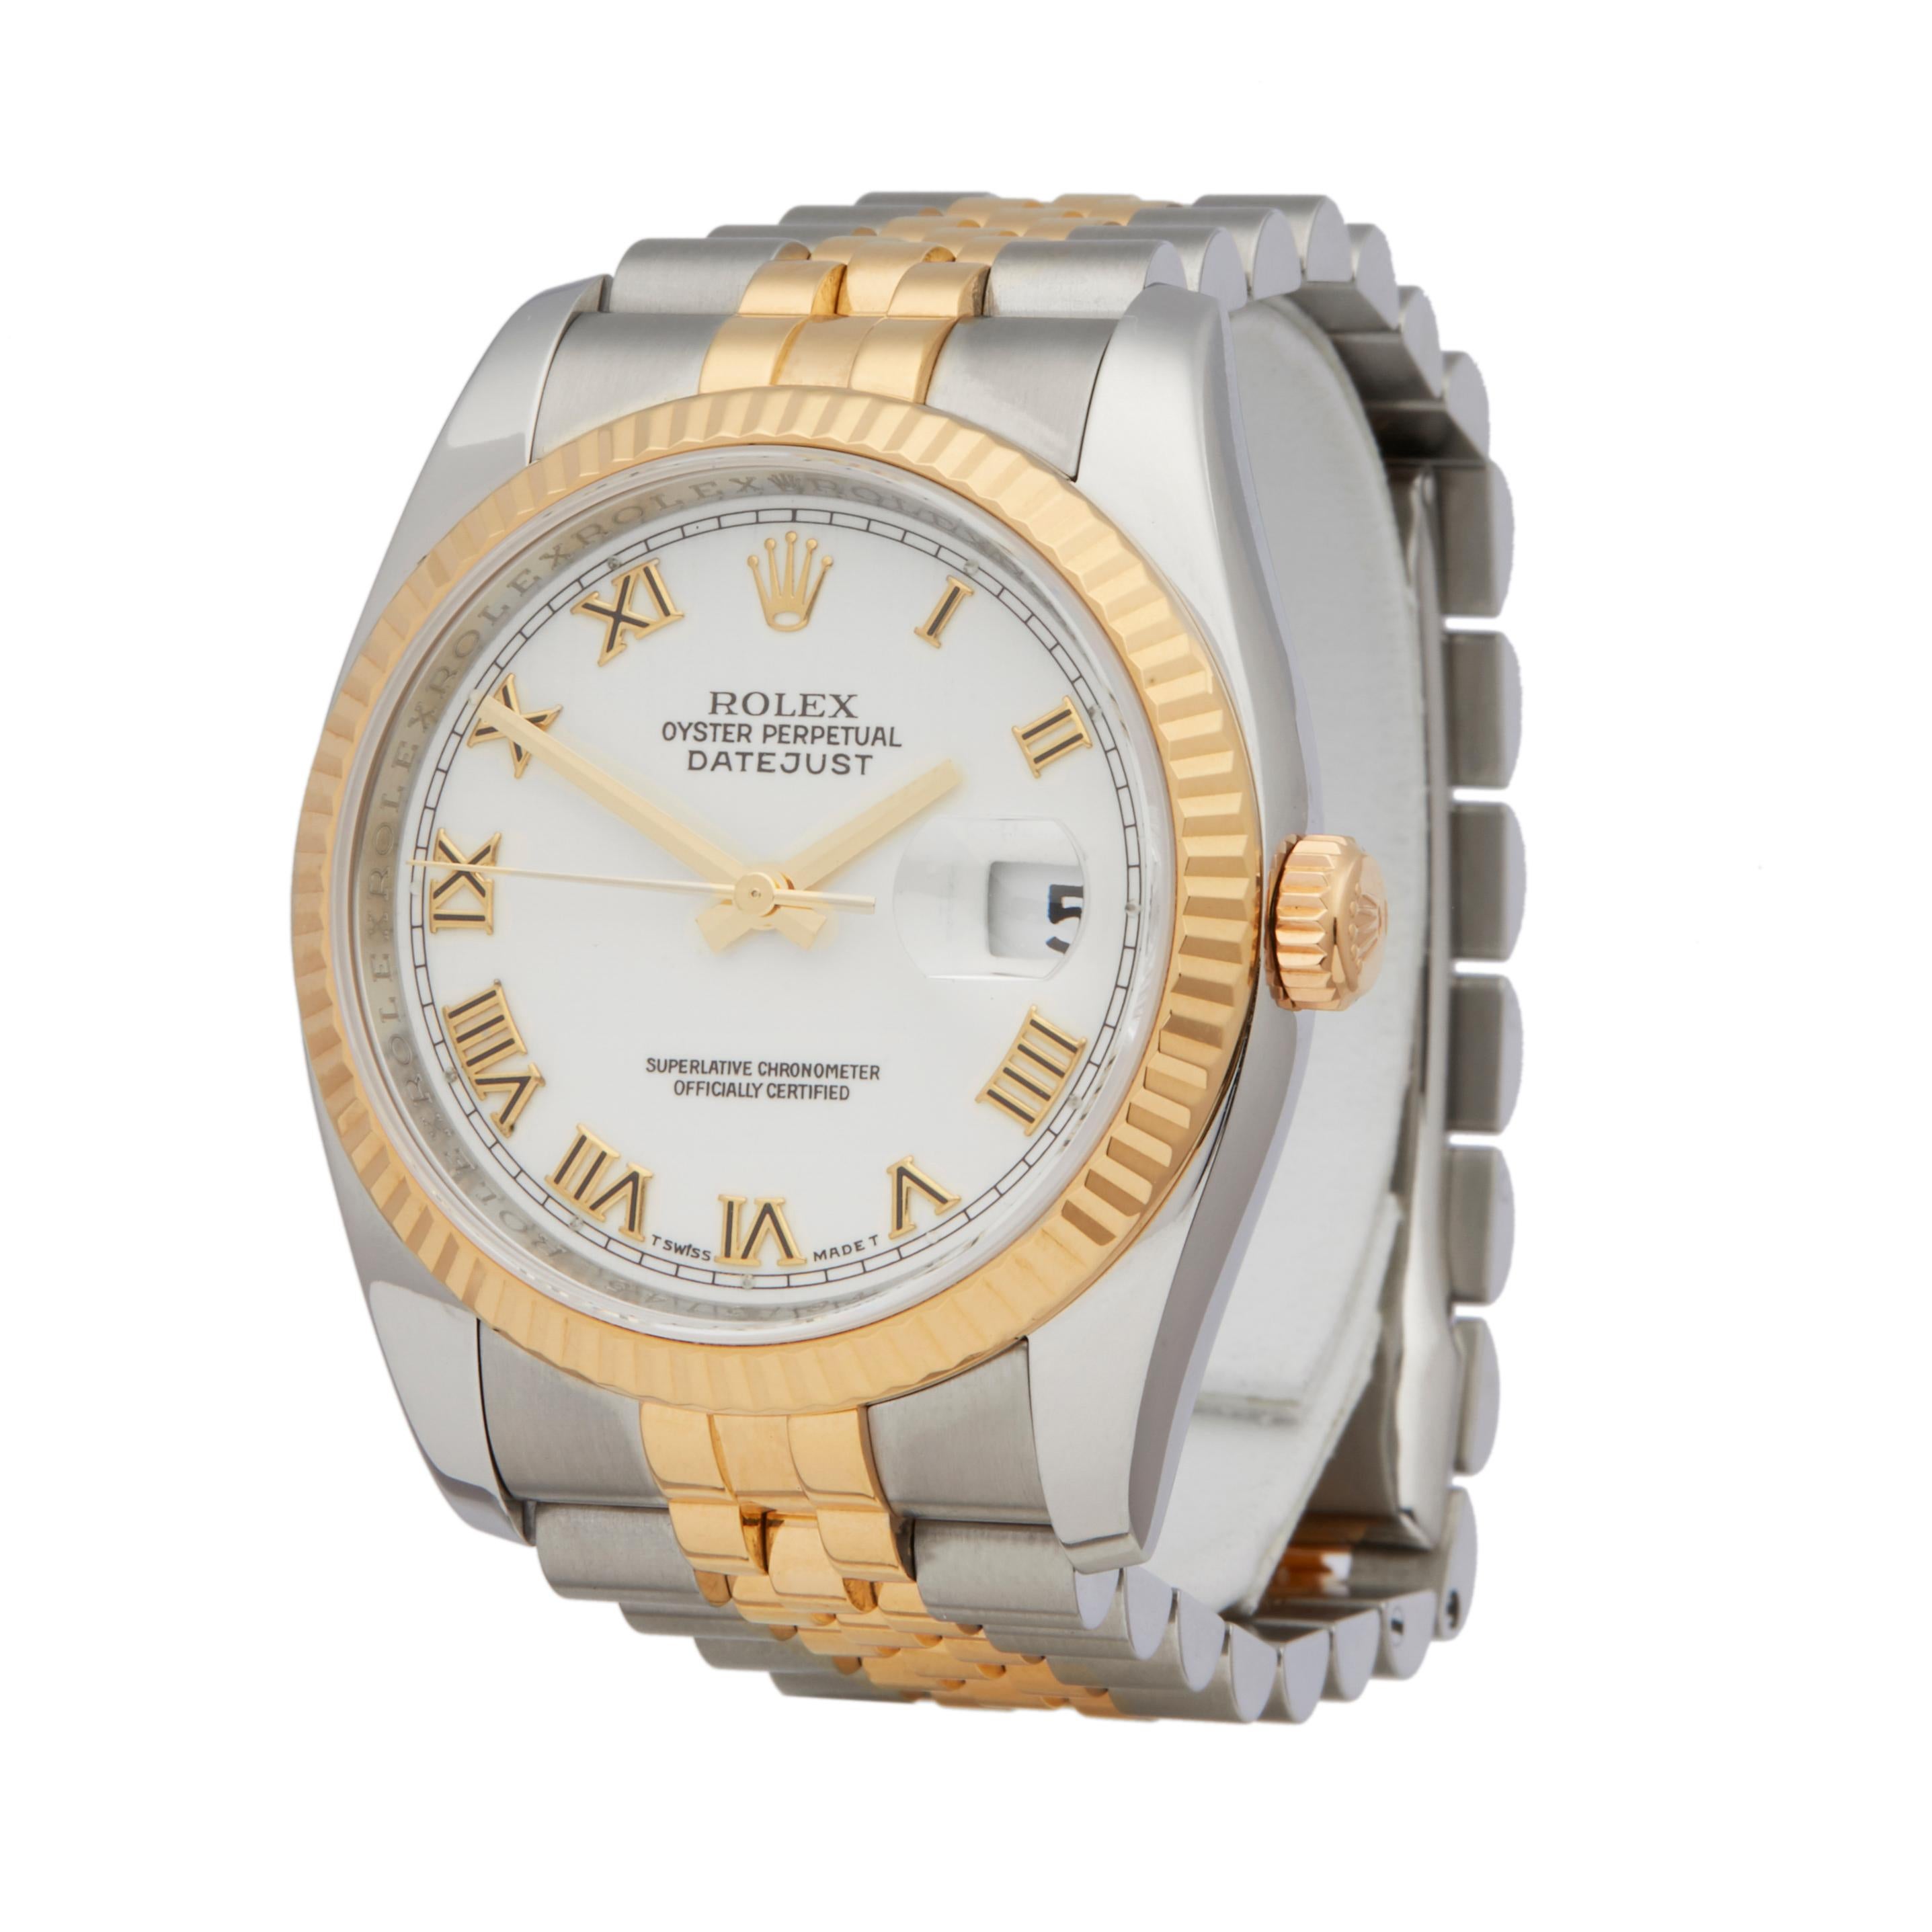 Reference: W3678
Manufacturer: Rolex
Model: Datejust
Model Reference: 116233
Age: 16th June 2010
Gender: Unisex
Box and Papers: Box, Manuals and Guarantee
Dial: Green Arabic
Glass: Sapphire Crystal
Movement: Automatic
Water Resistance: To